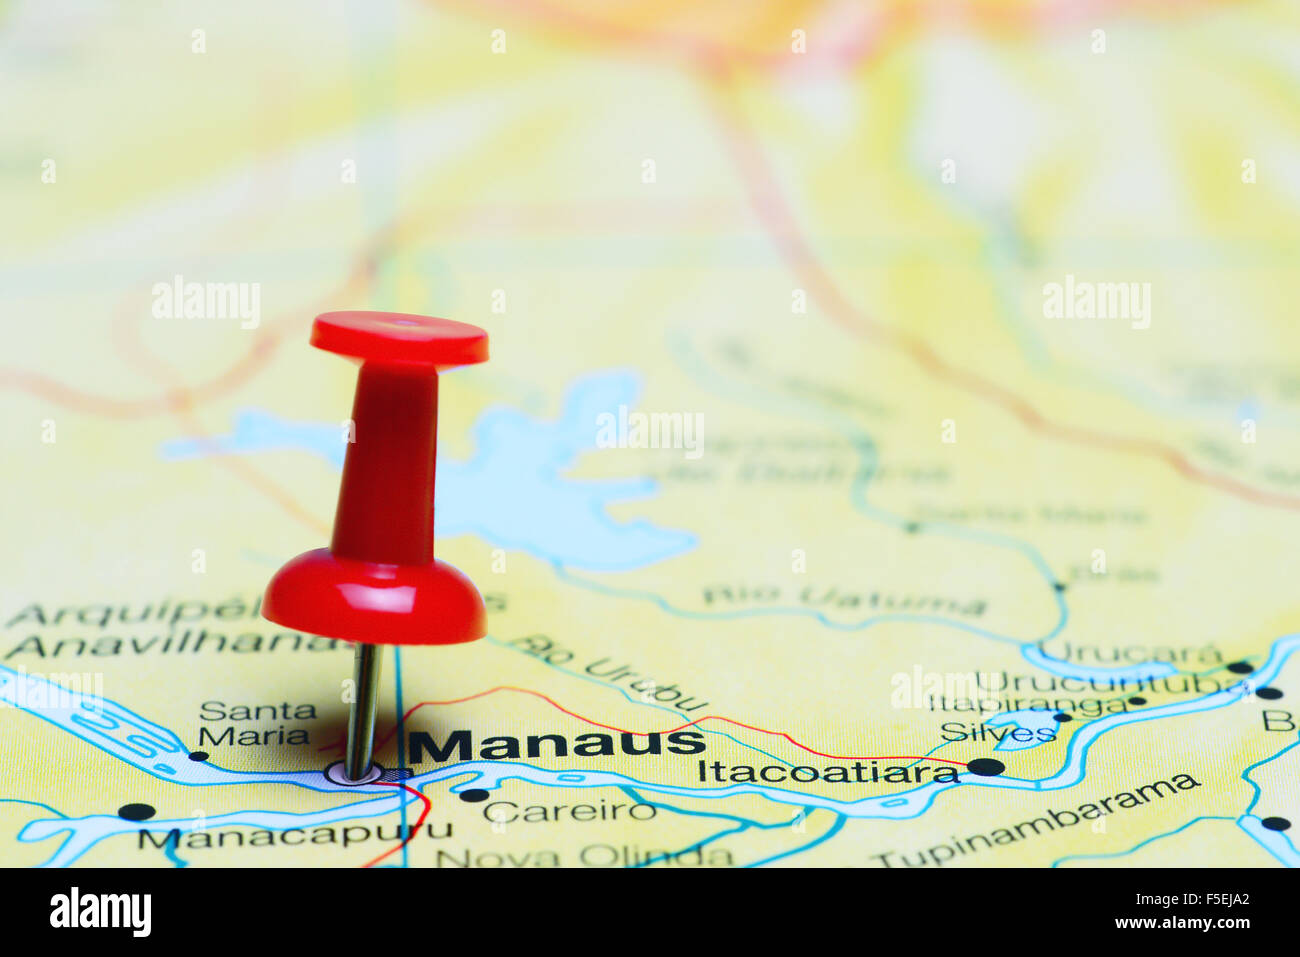 Manaus pinned on a map of Brazil Stock Photo